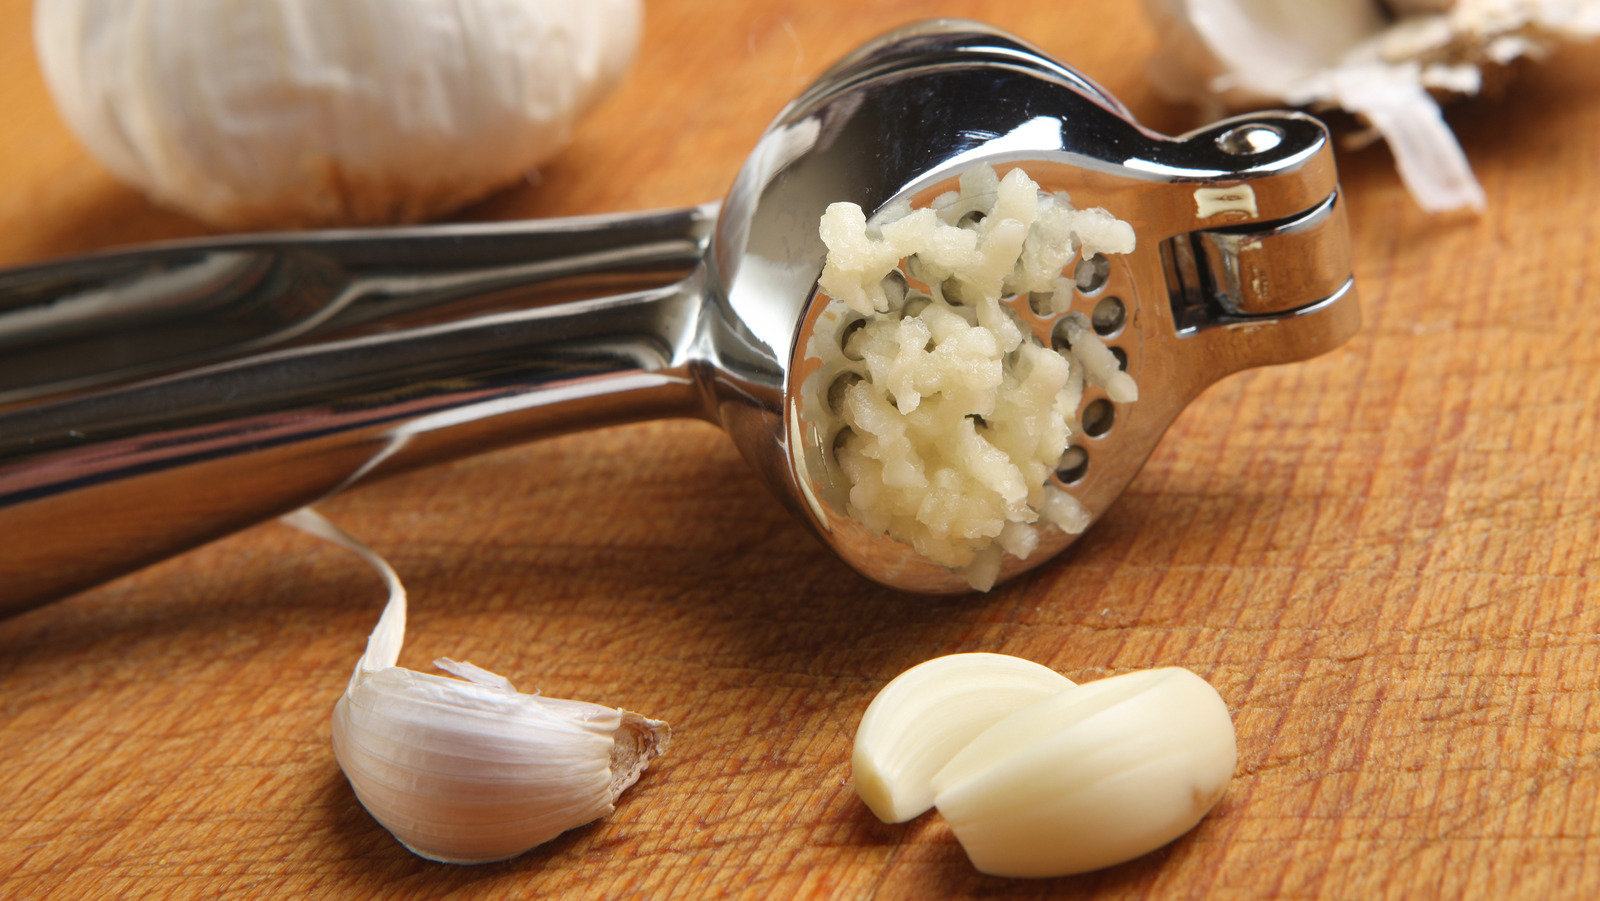 2 Totally Awesome Garlic Press Tricks - This Week for Dinner